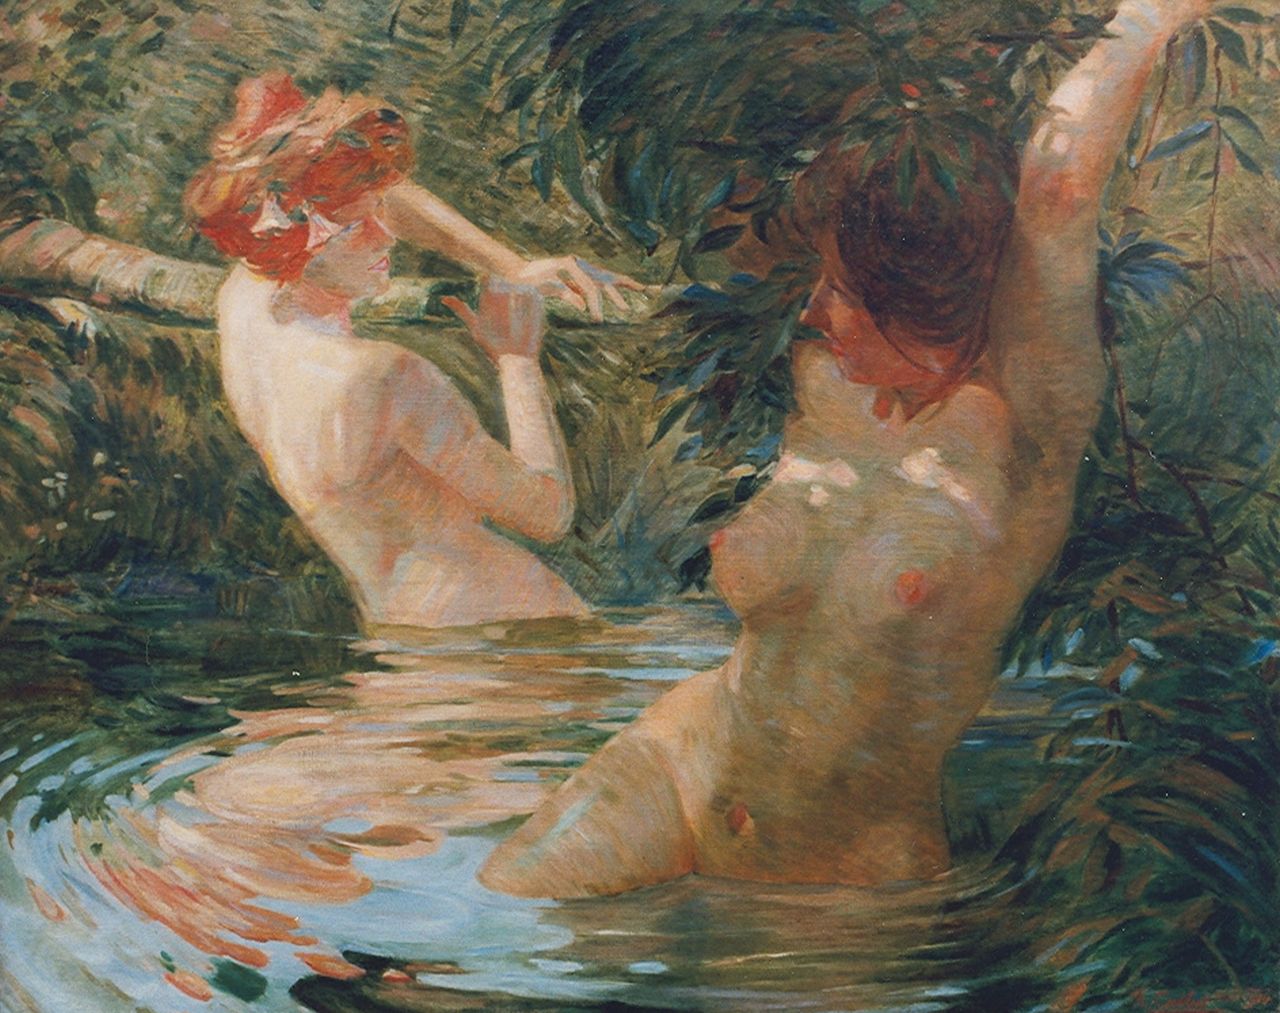 Calbet A.  | Antoine Calbet, Two bathers in a forest pond, Öl auf Leinwand 80,7 x 100,0 cm, signed l.r. und dated 1914